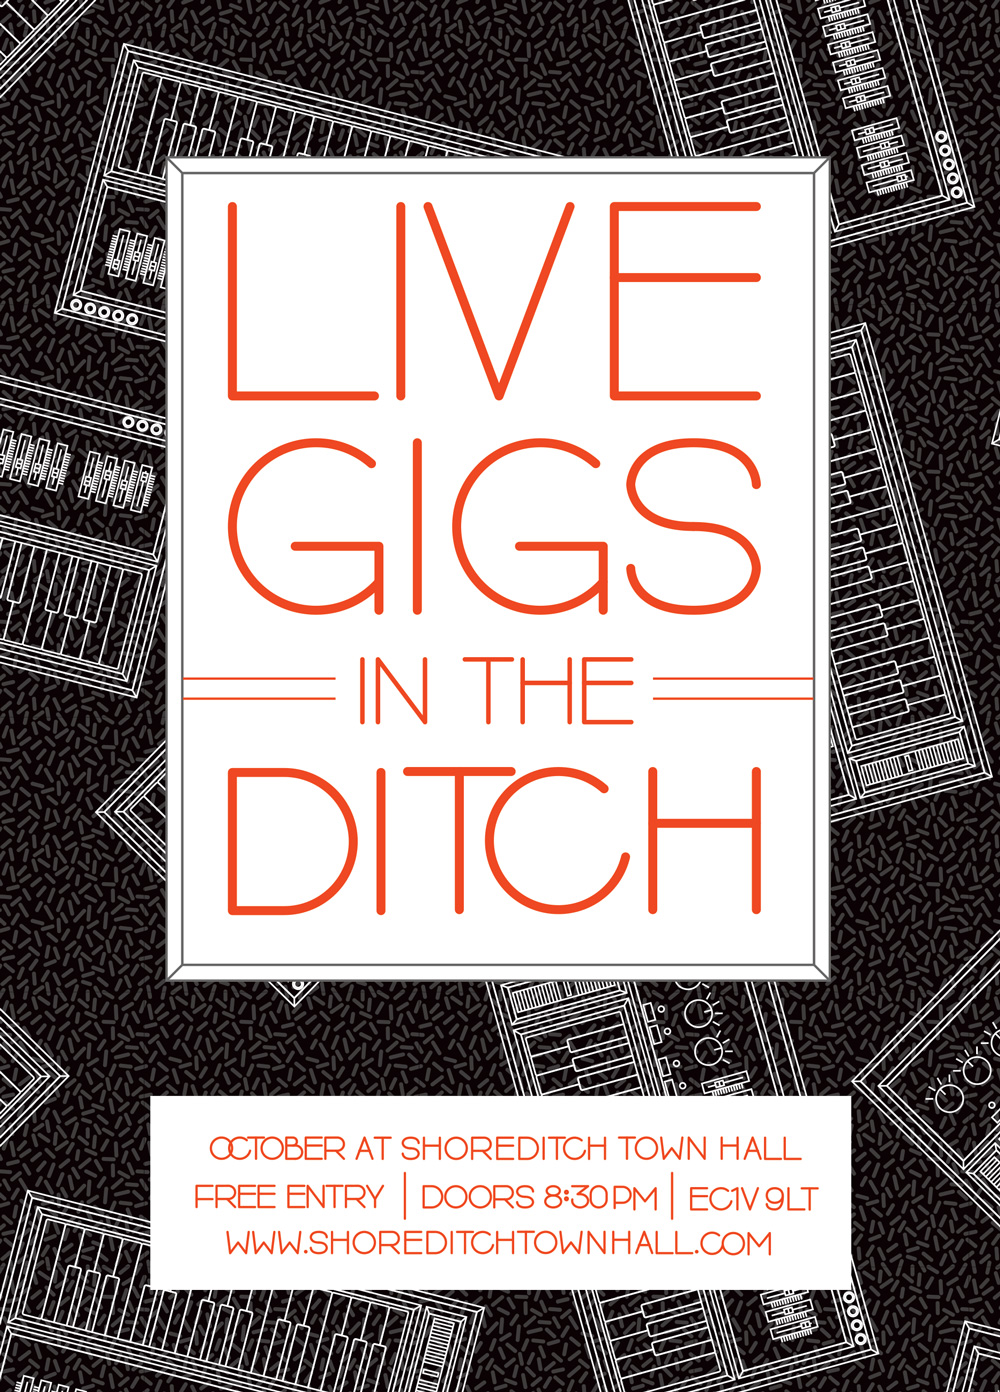 The Ditch Flyer